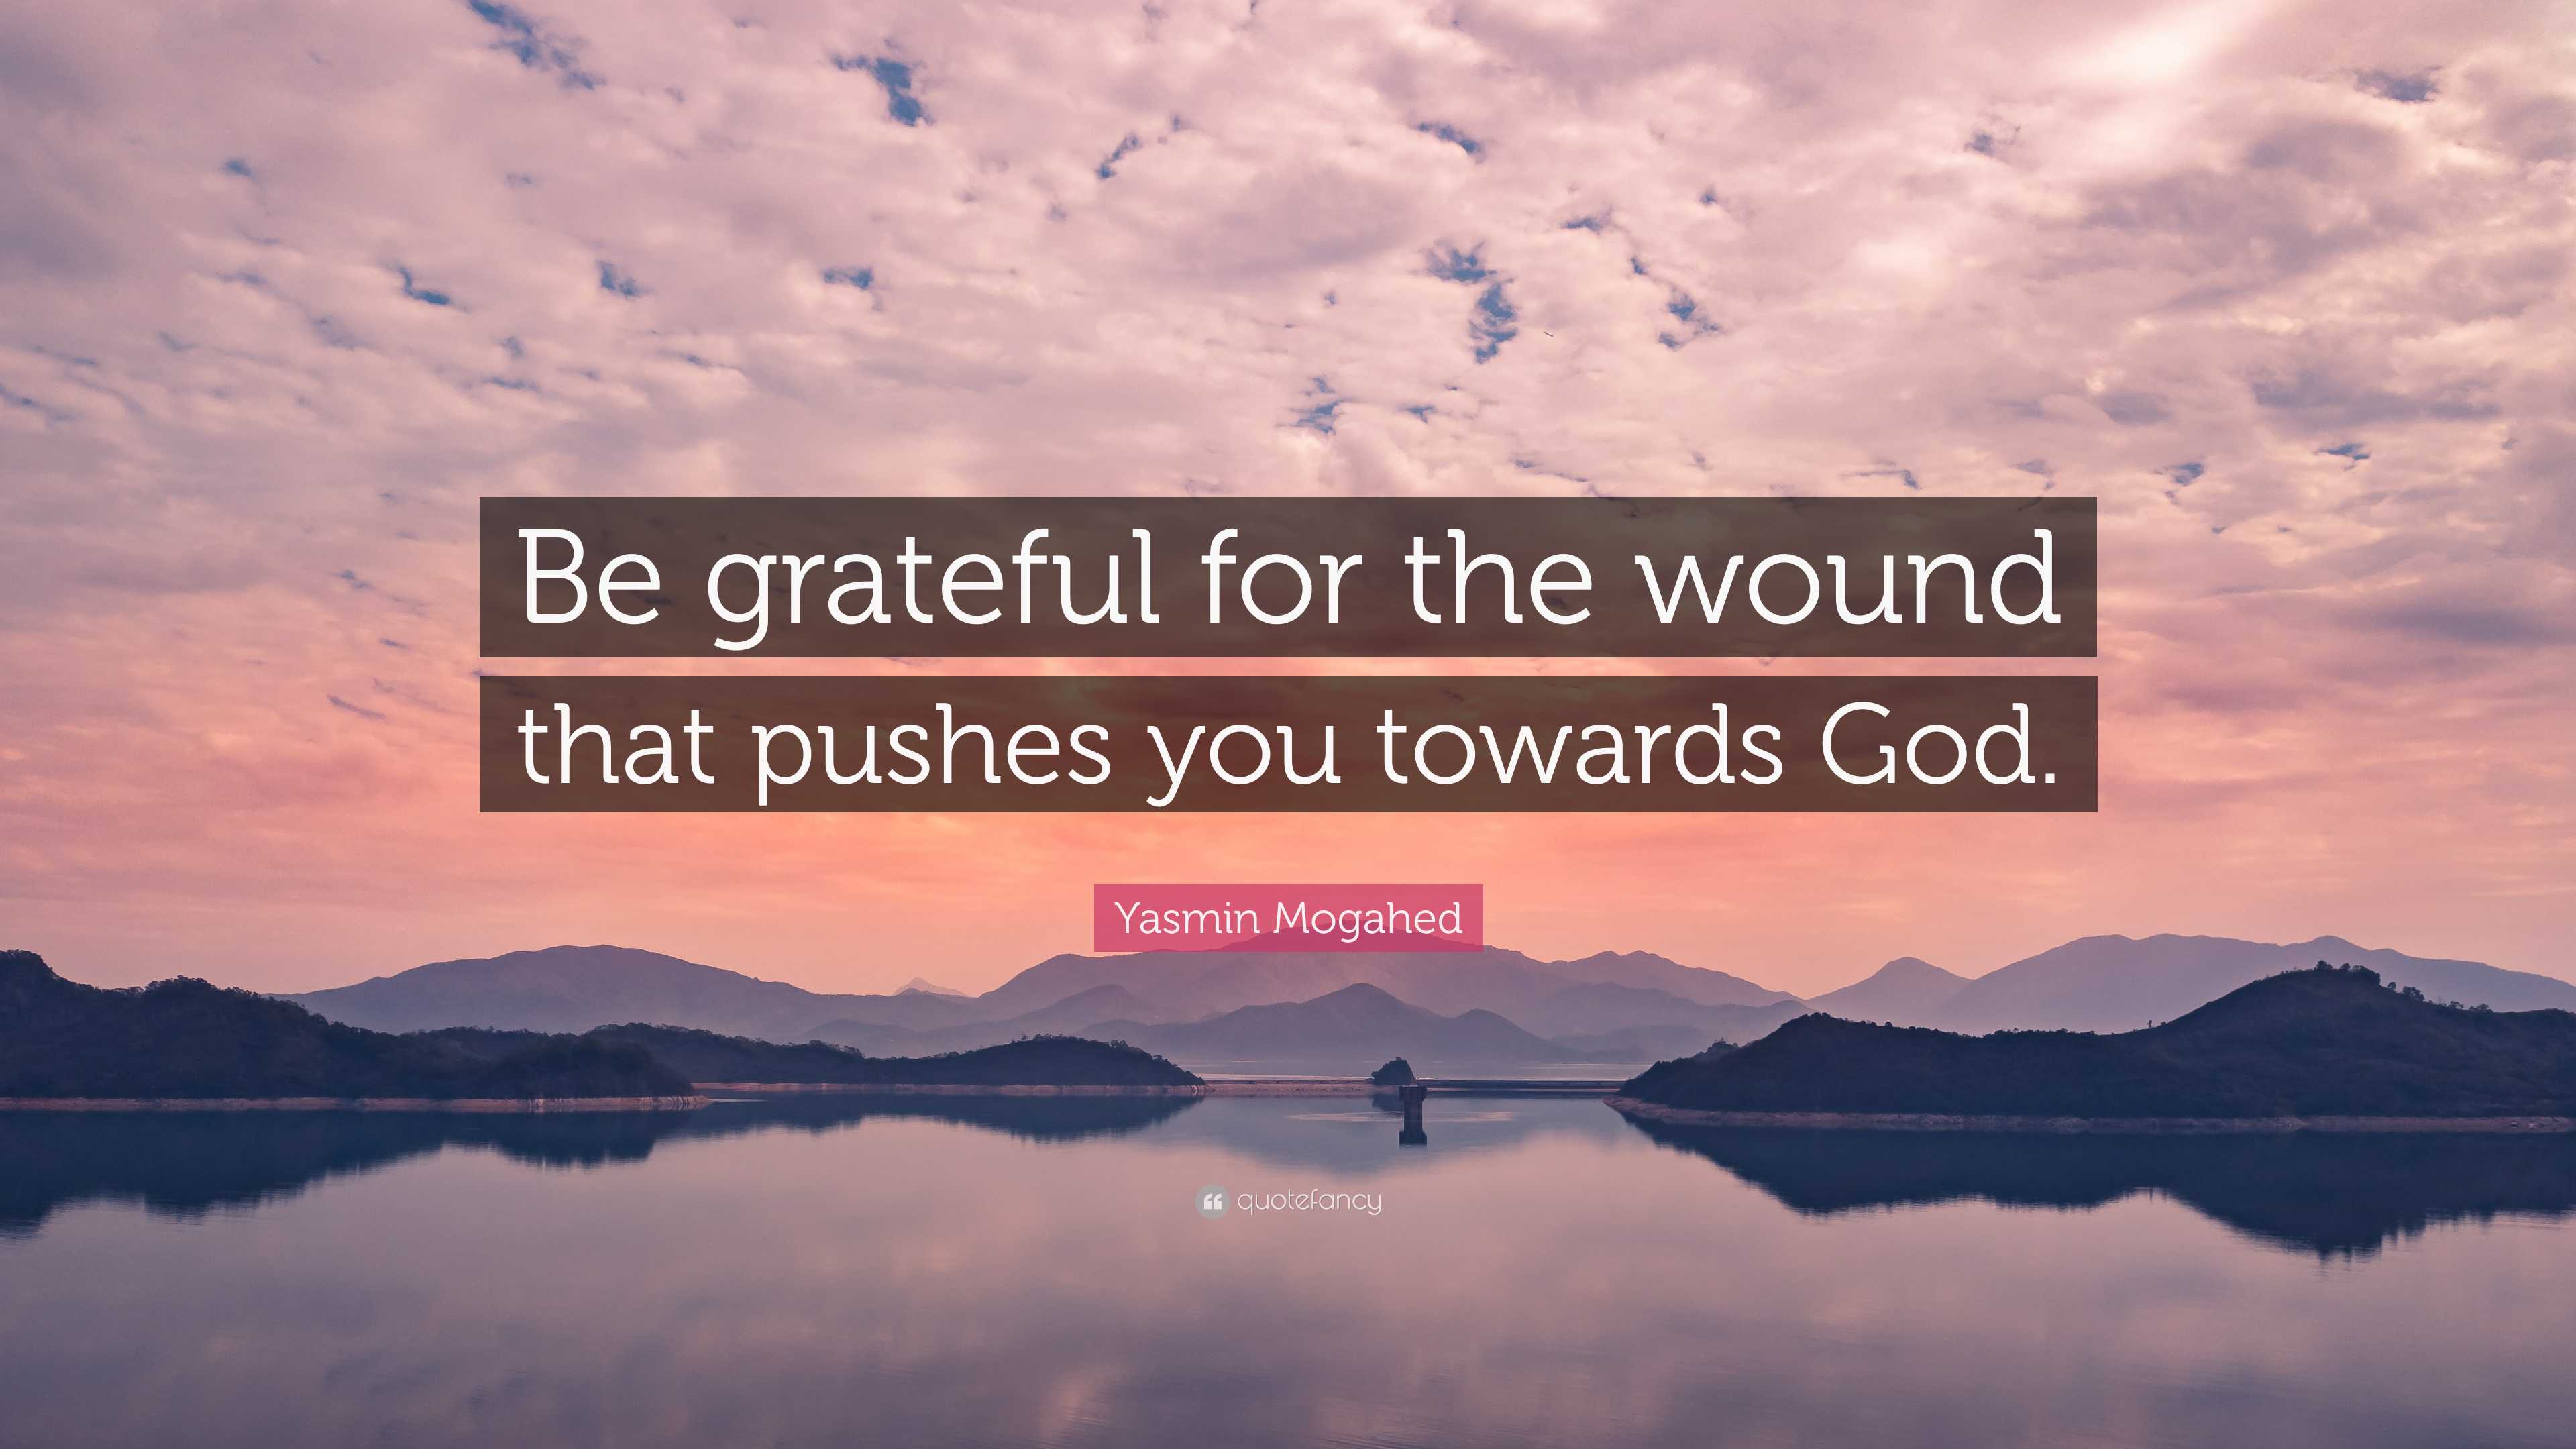 https://quotefancy.com/media/wallpaper/3840x2160/7921877-Yasmin-Mogahed-Quote-Be-grateful-for-the-wound-that-pushes-you.jpg